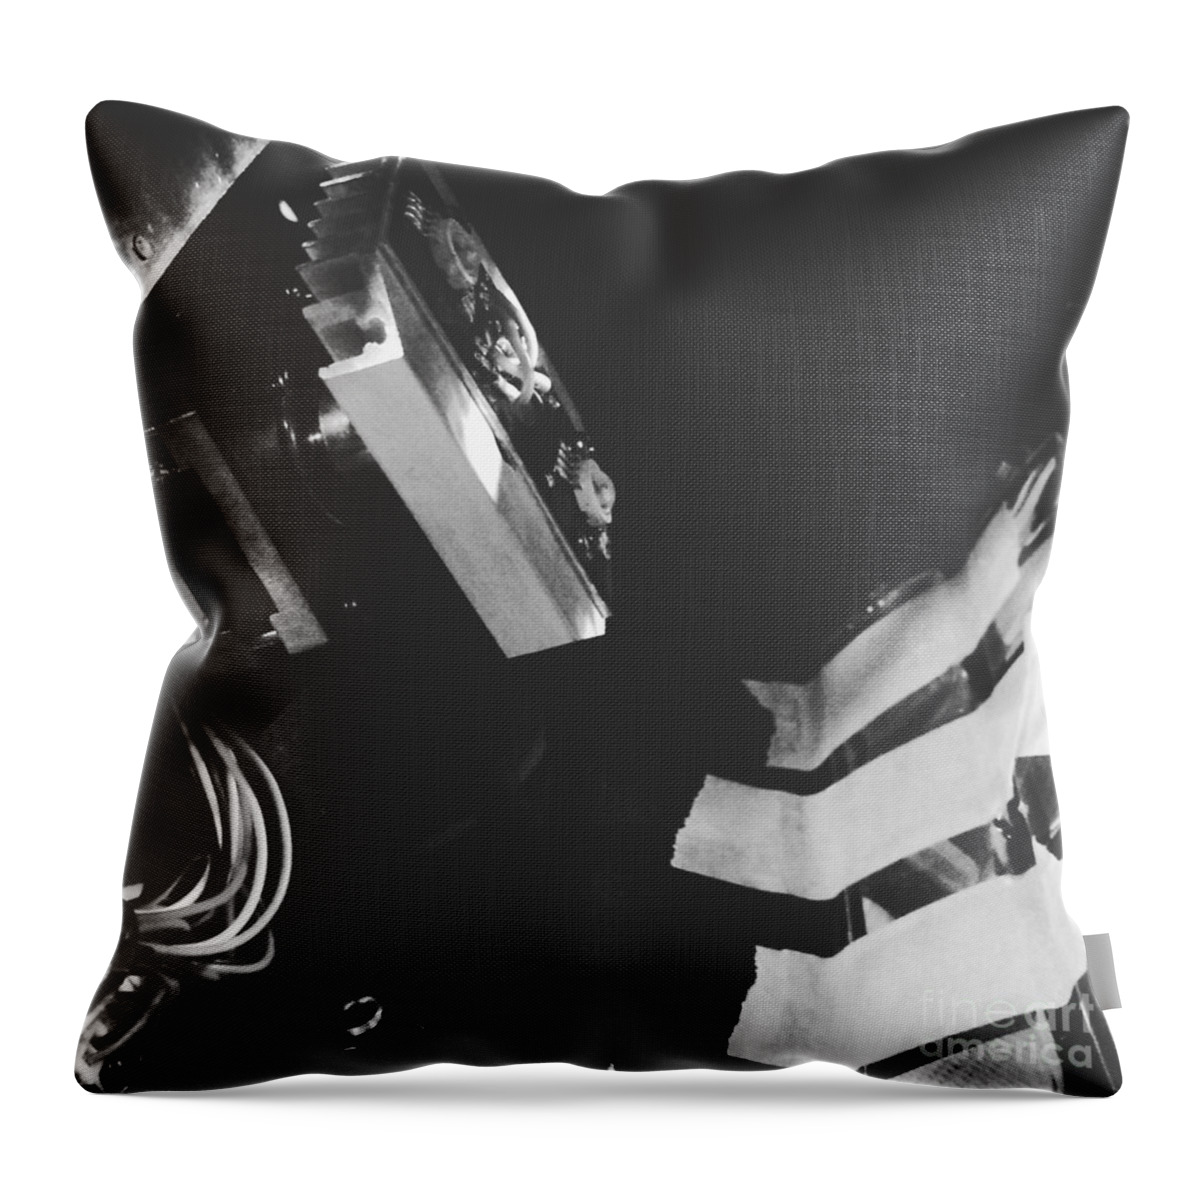 Black And White Throw Pillow featuring the photograph Spin Repair by Jeff Danos